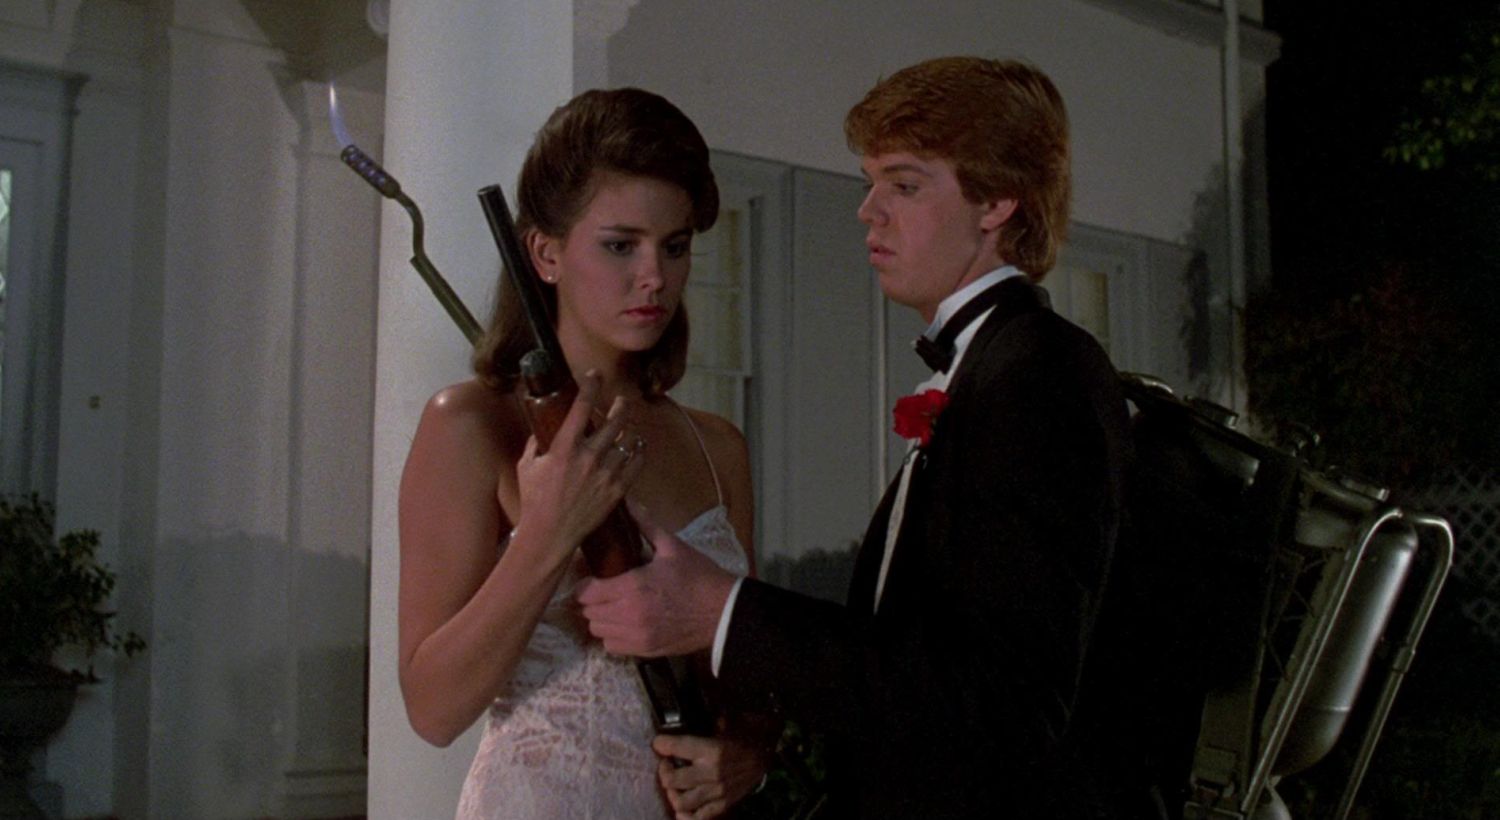 Night of the Creeps (1986) - Theatrical or Director's Cut? This or ...